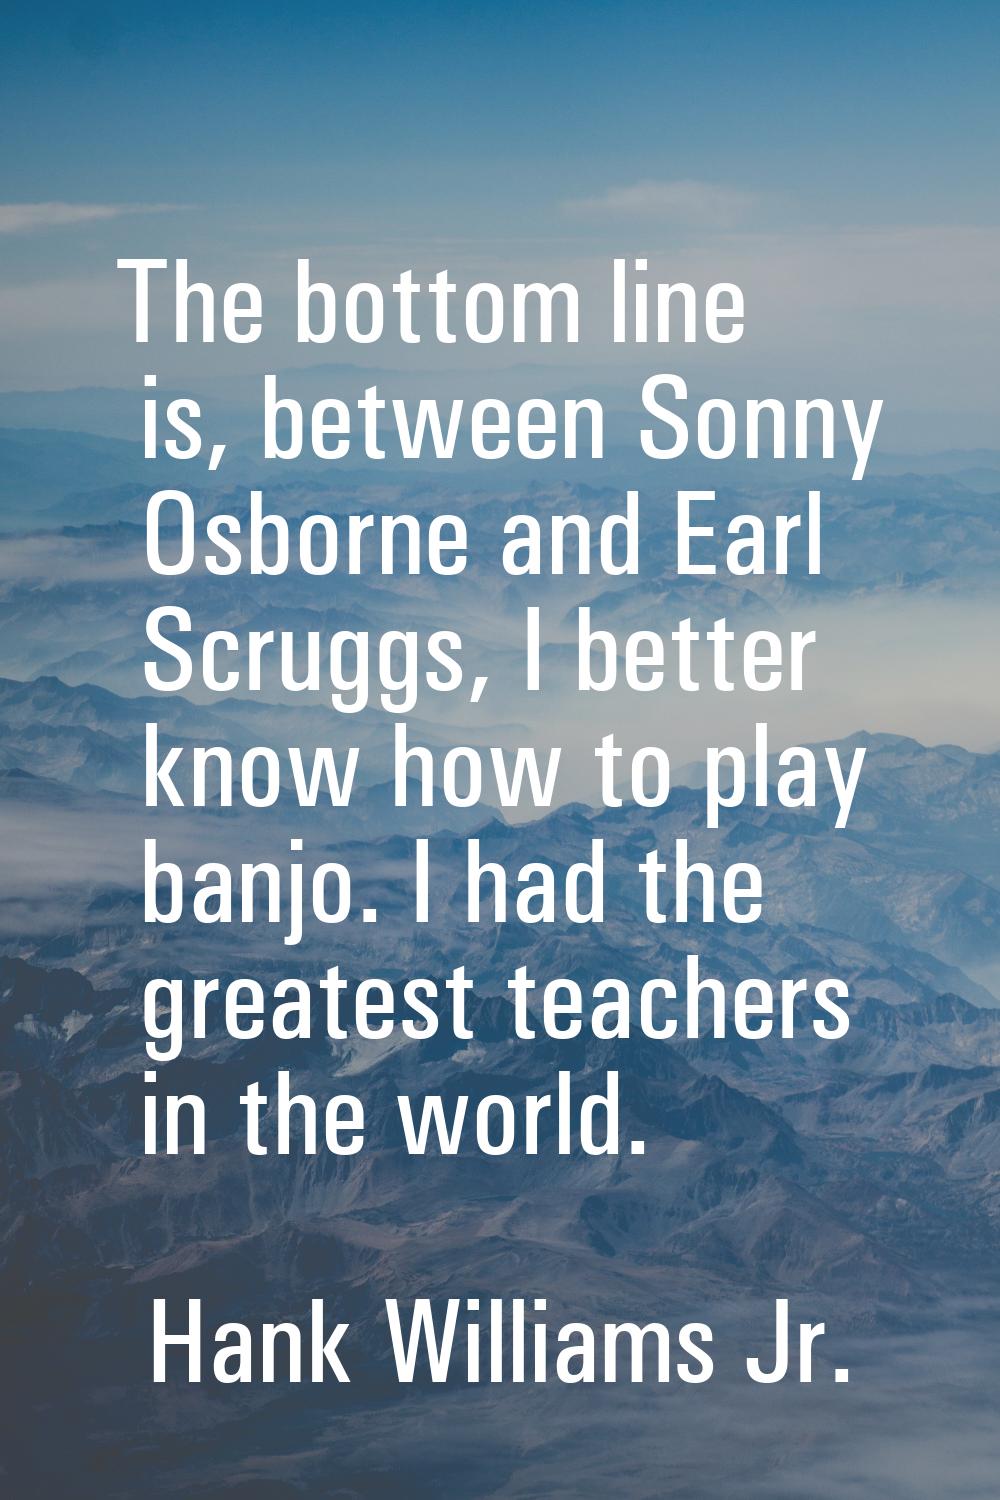 The bottom line is, between Sonny Osborne and Earl Scruggs, I better know how to play banjo. I had 